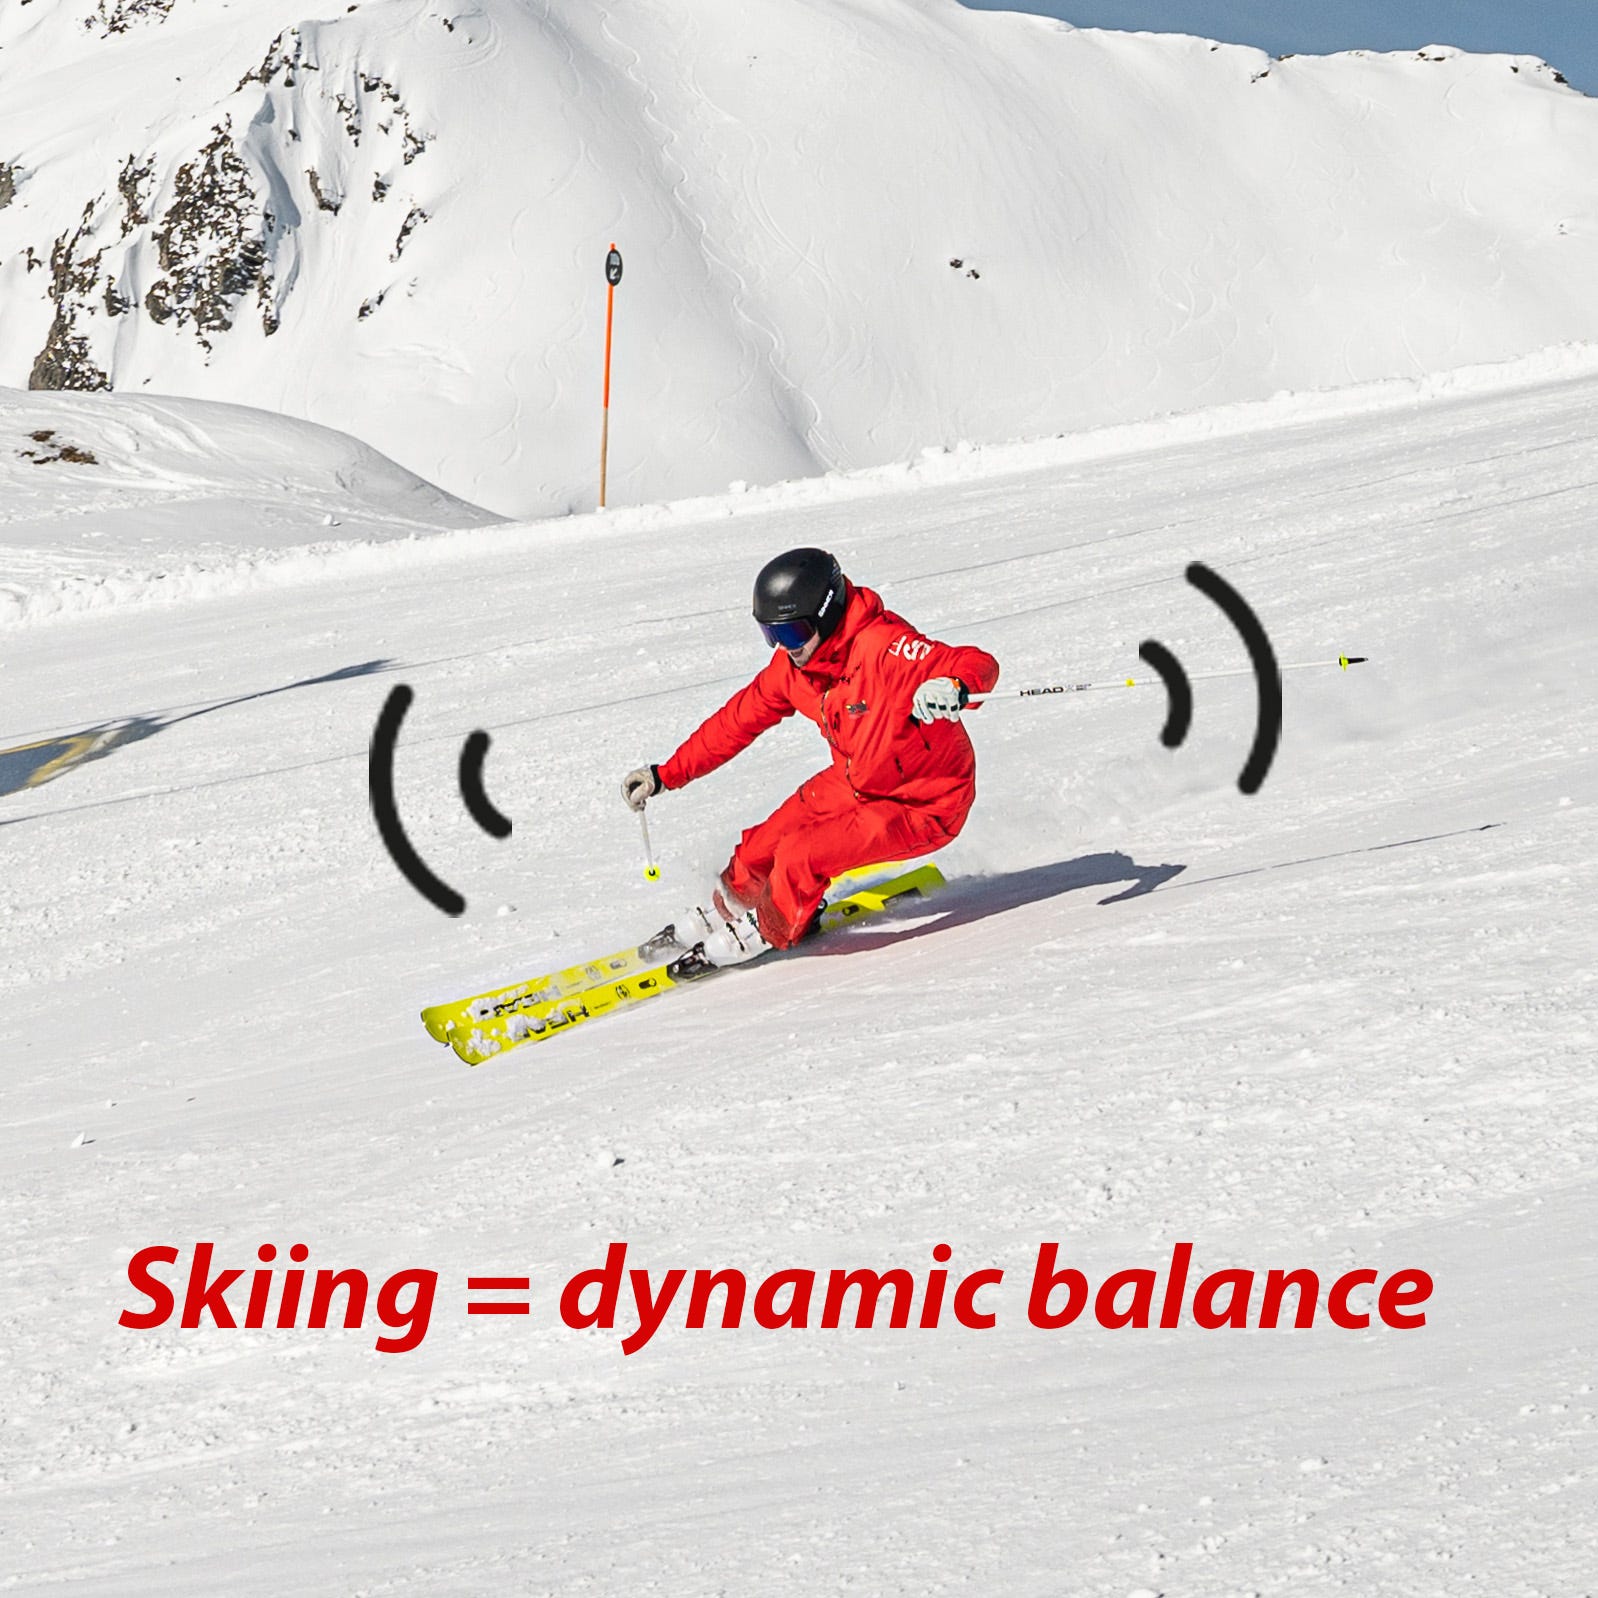 Training for dynamic balance all year round is essential for growth as a skier